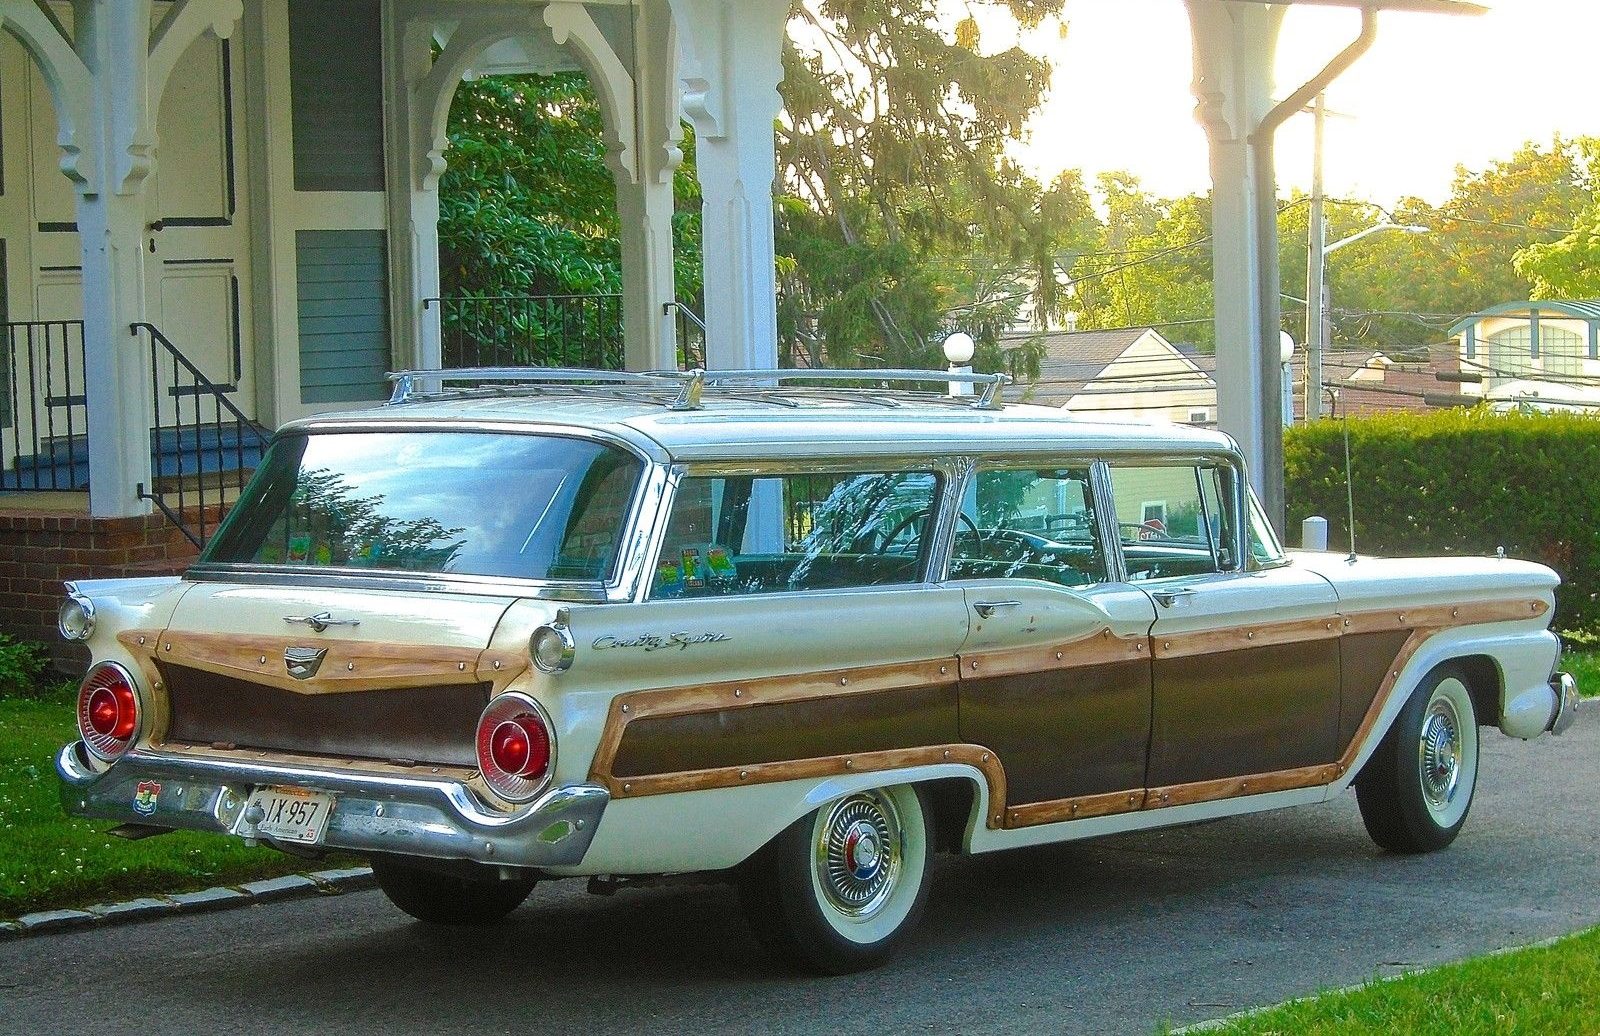 Loaded Lugger: 1959 Ford Country Squire.